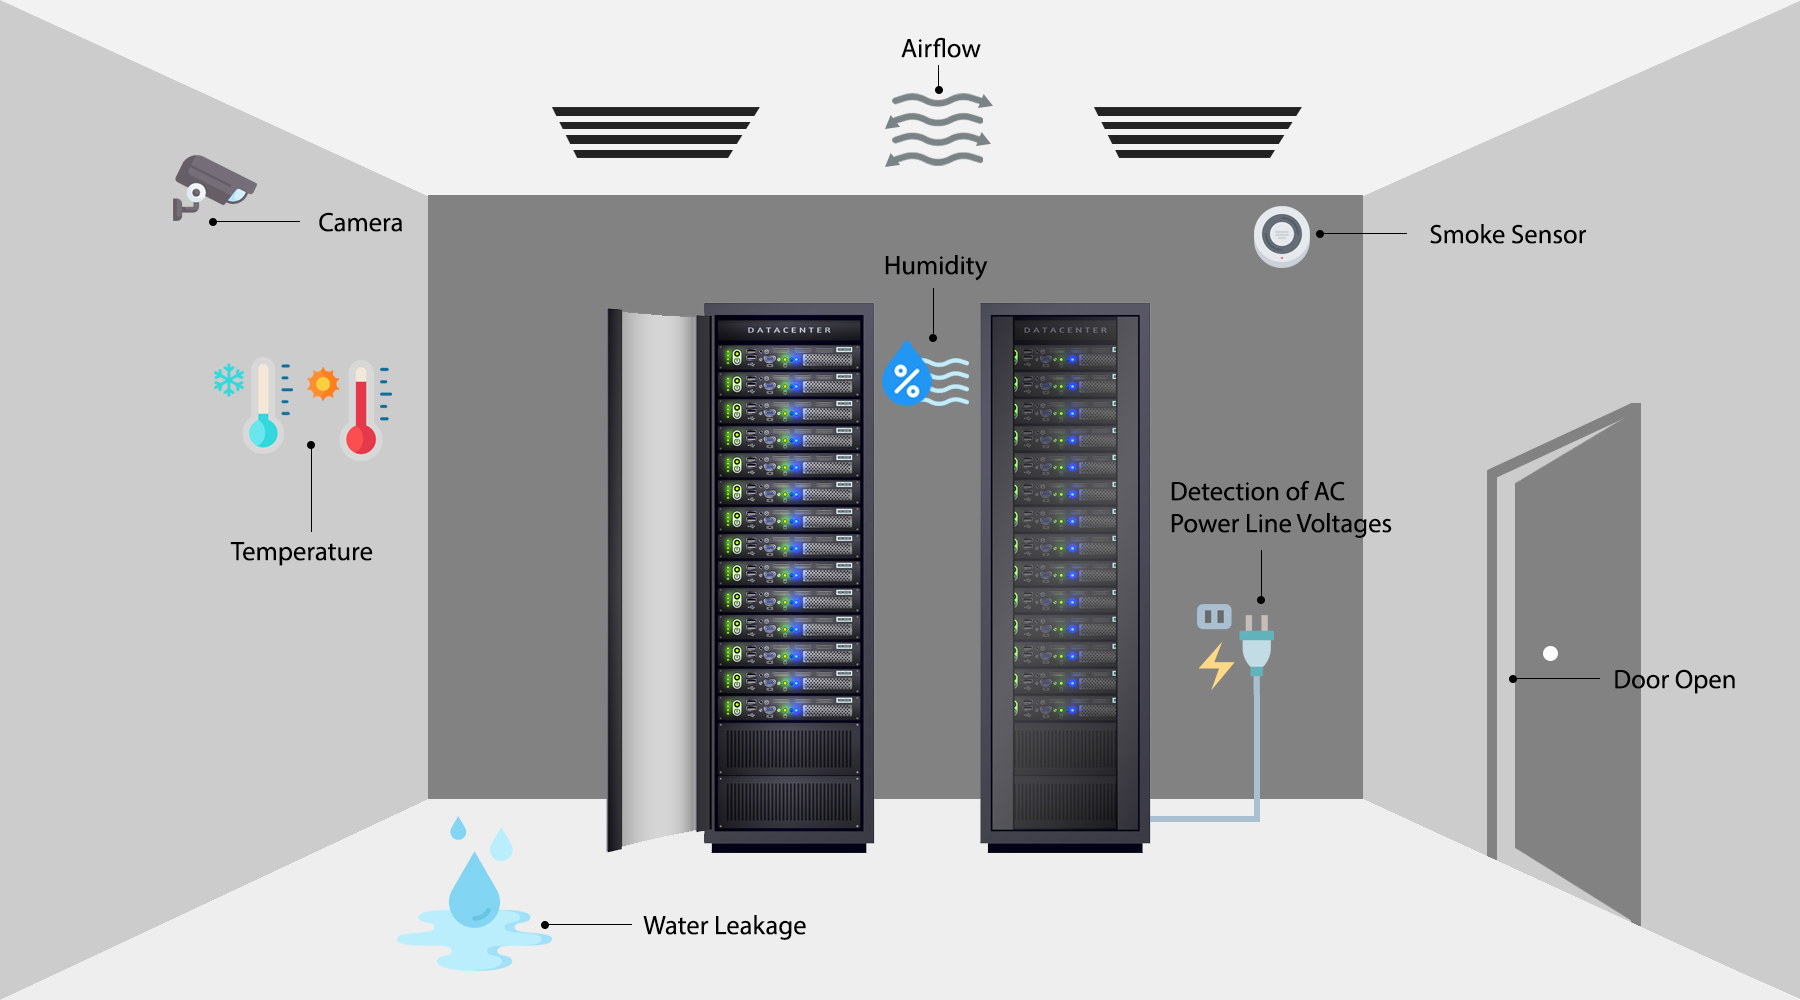 Server Room Temperature & Humidity Monitor Specialists